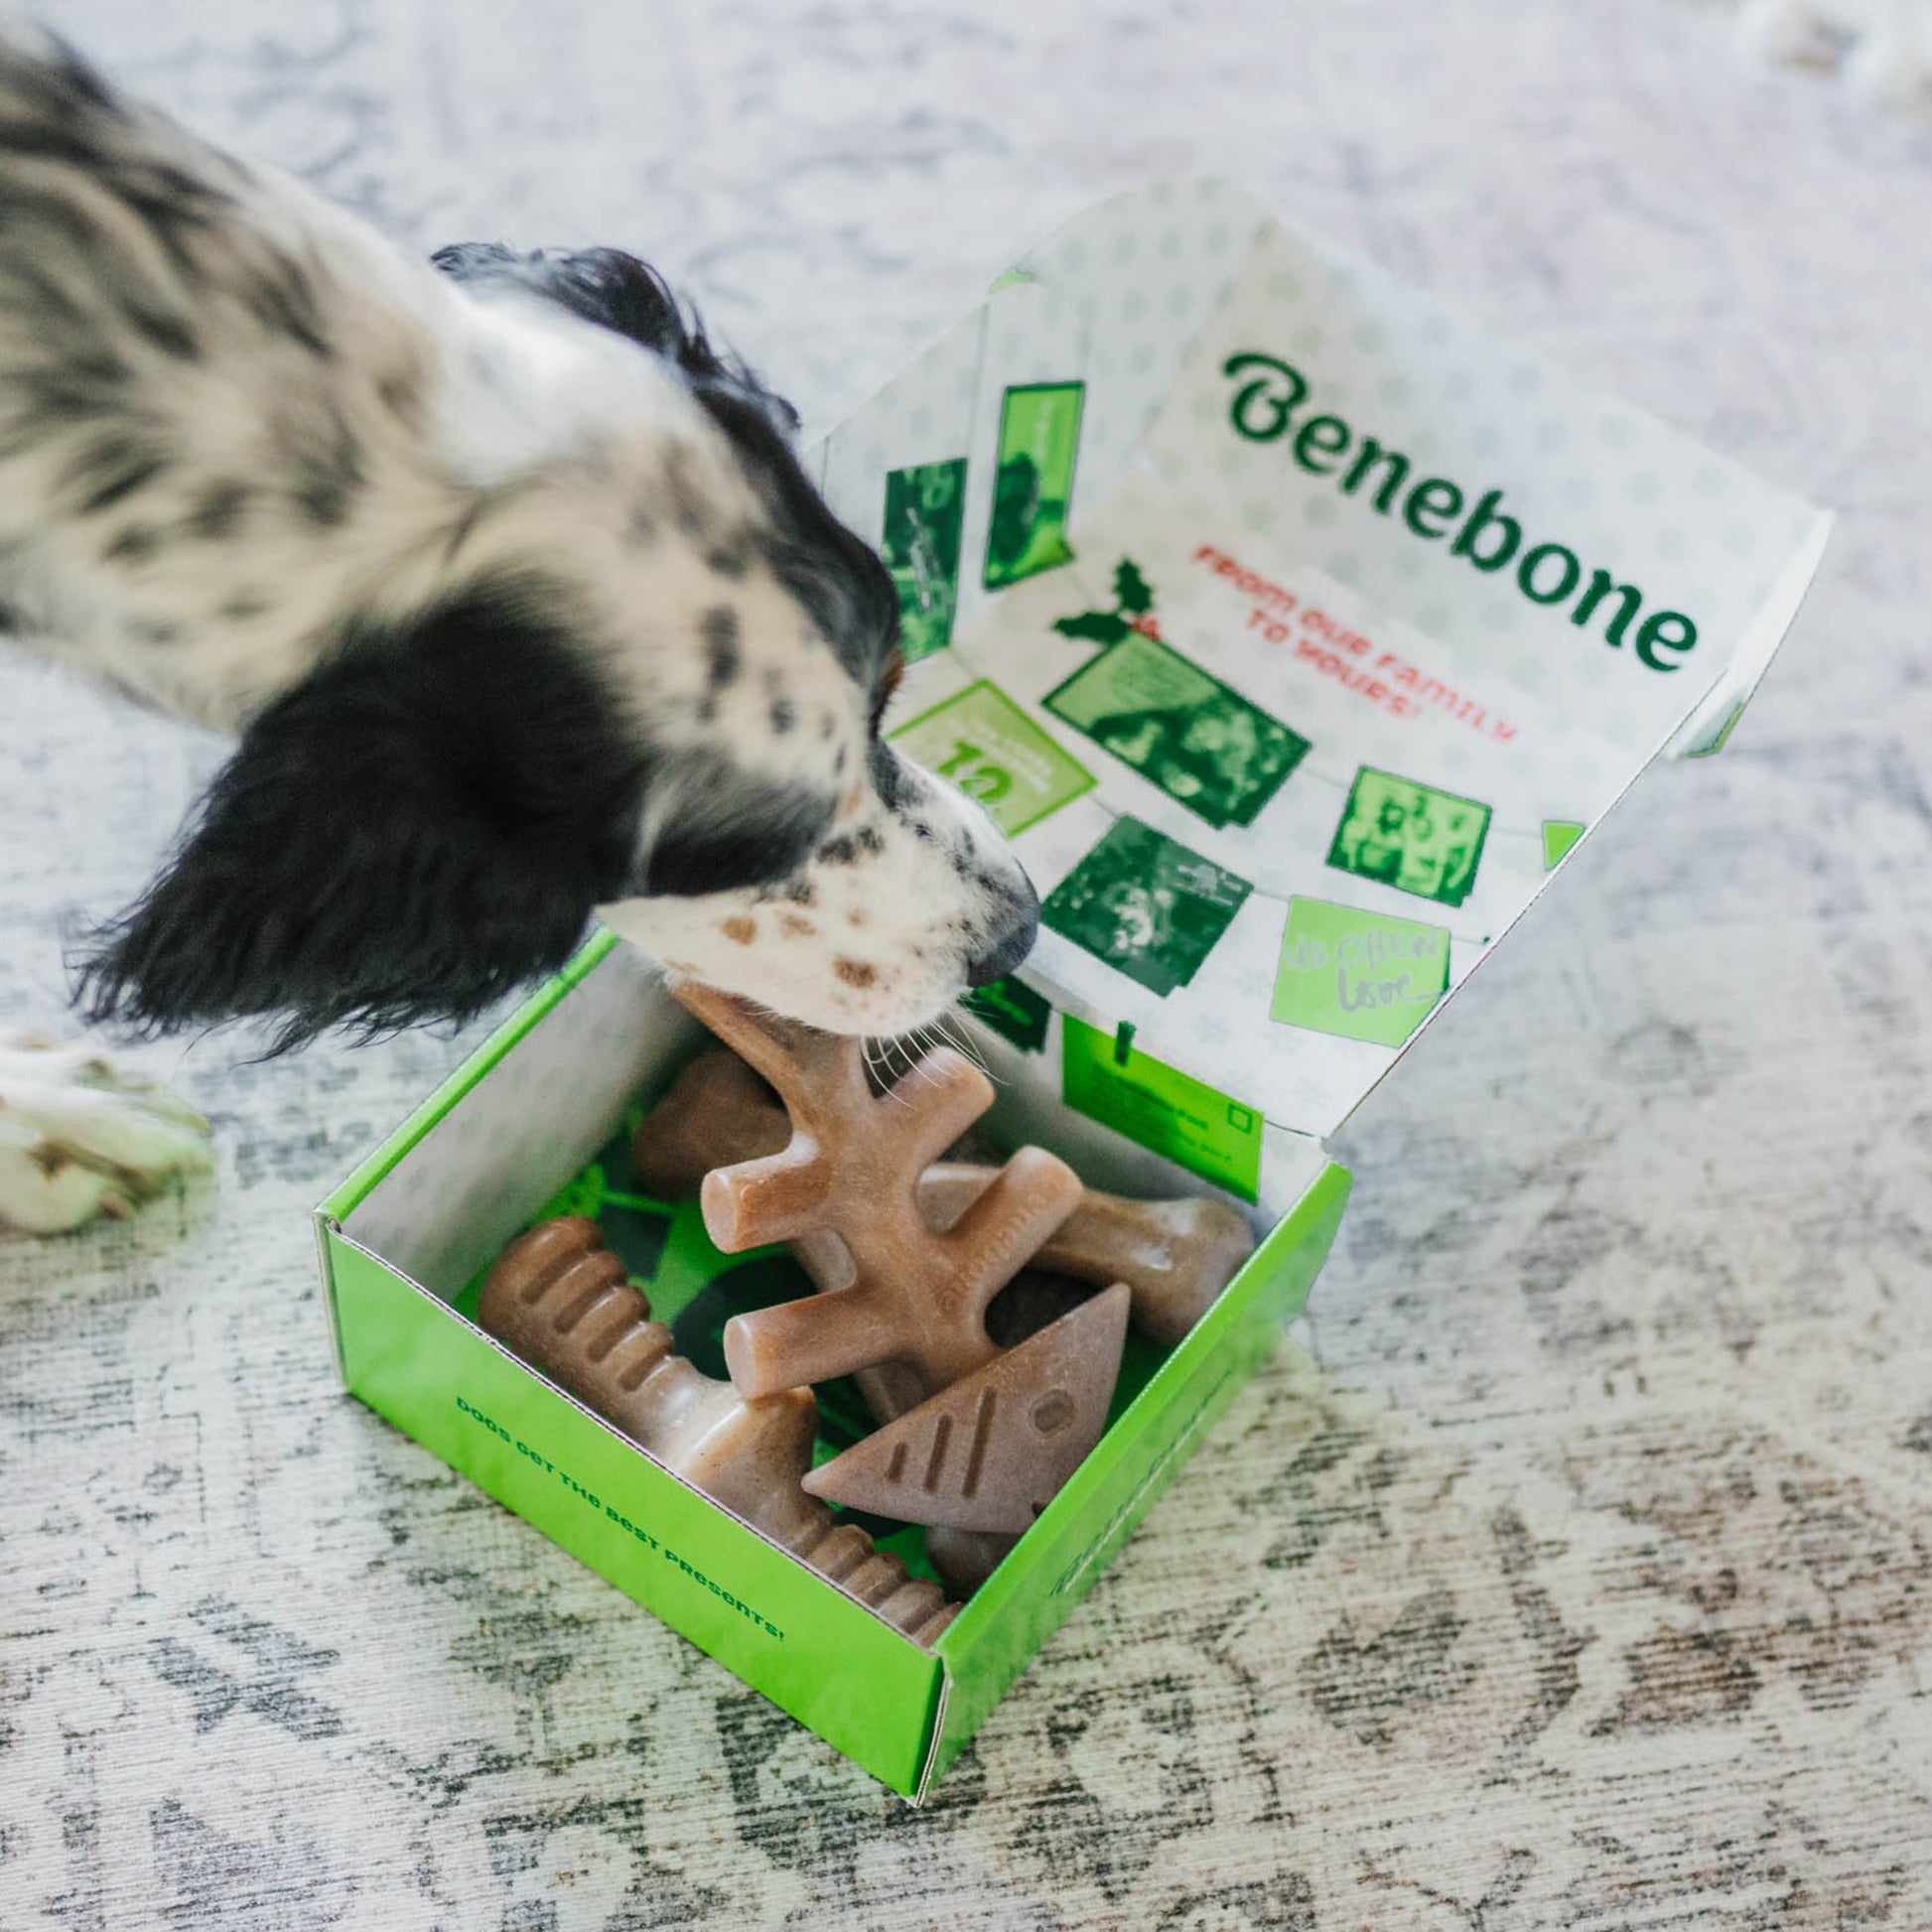 Holiday gift Box and Benebones with dog